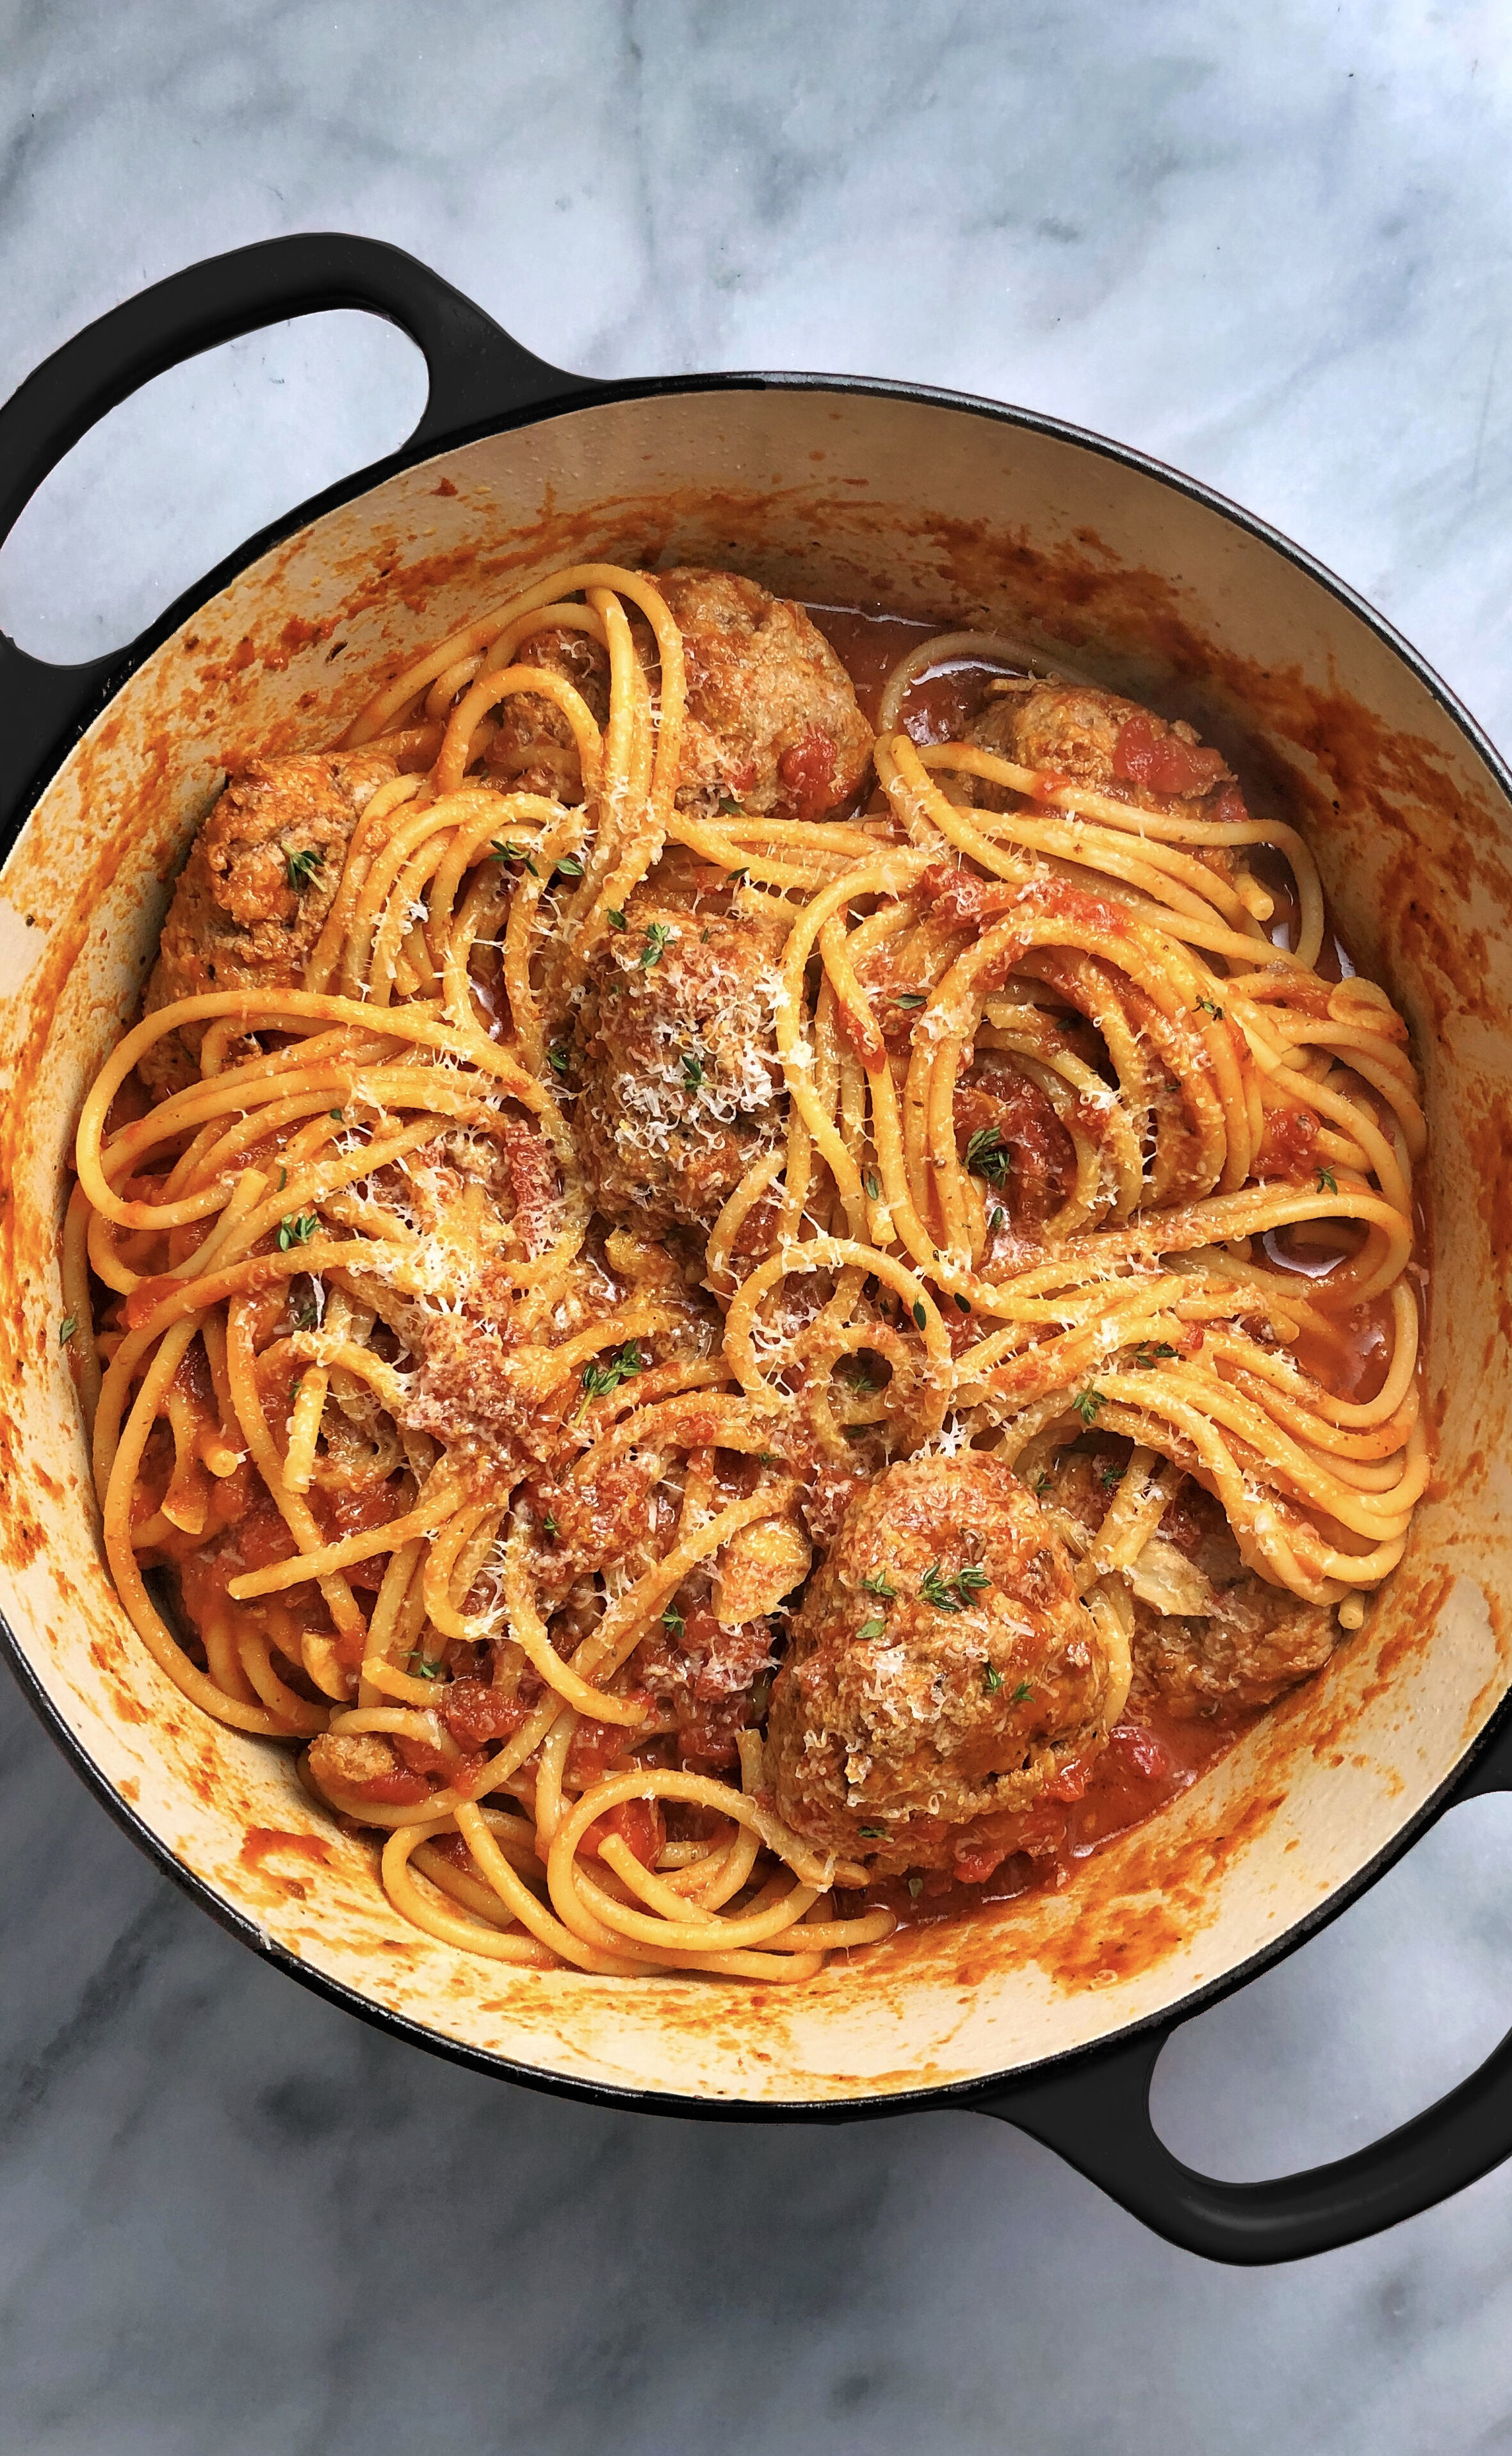 Classic Spaghetti with Meatballs recipe by Jake Cohen | The Feedfeed